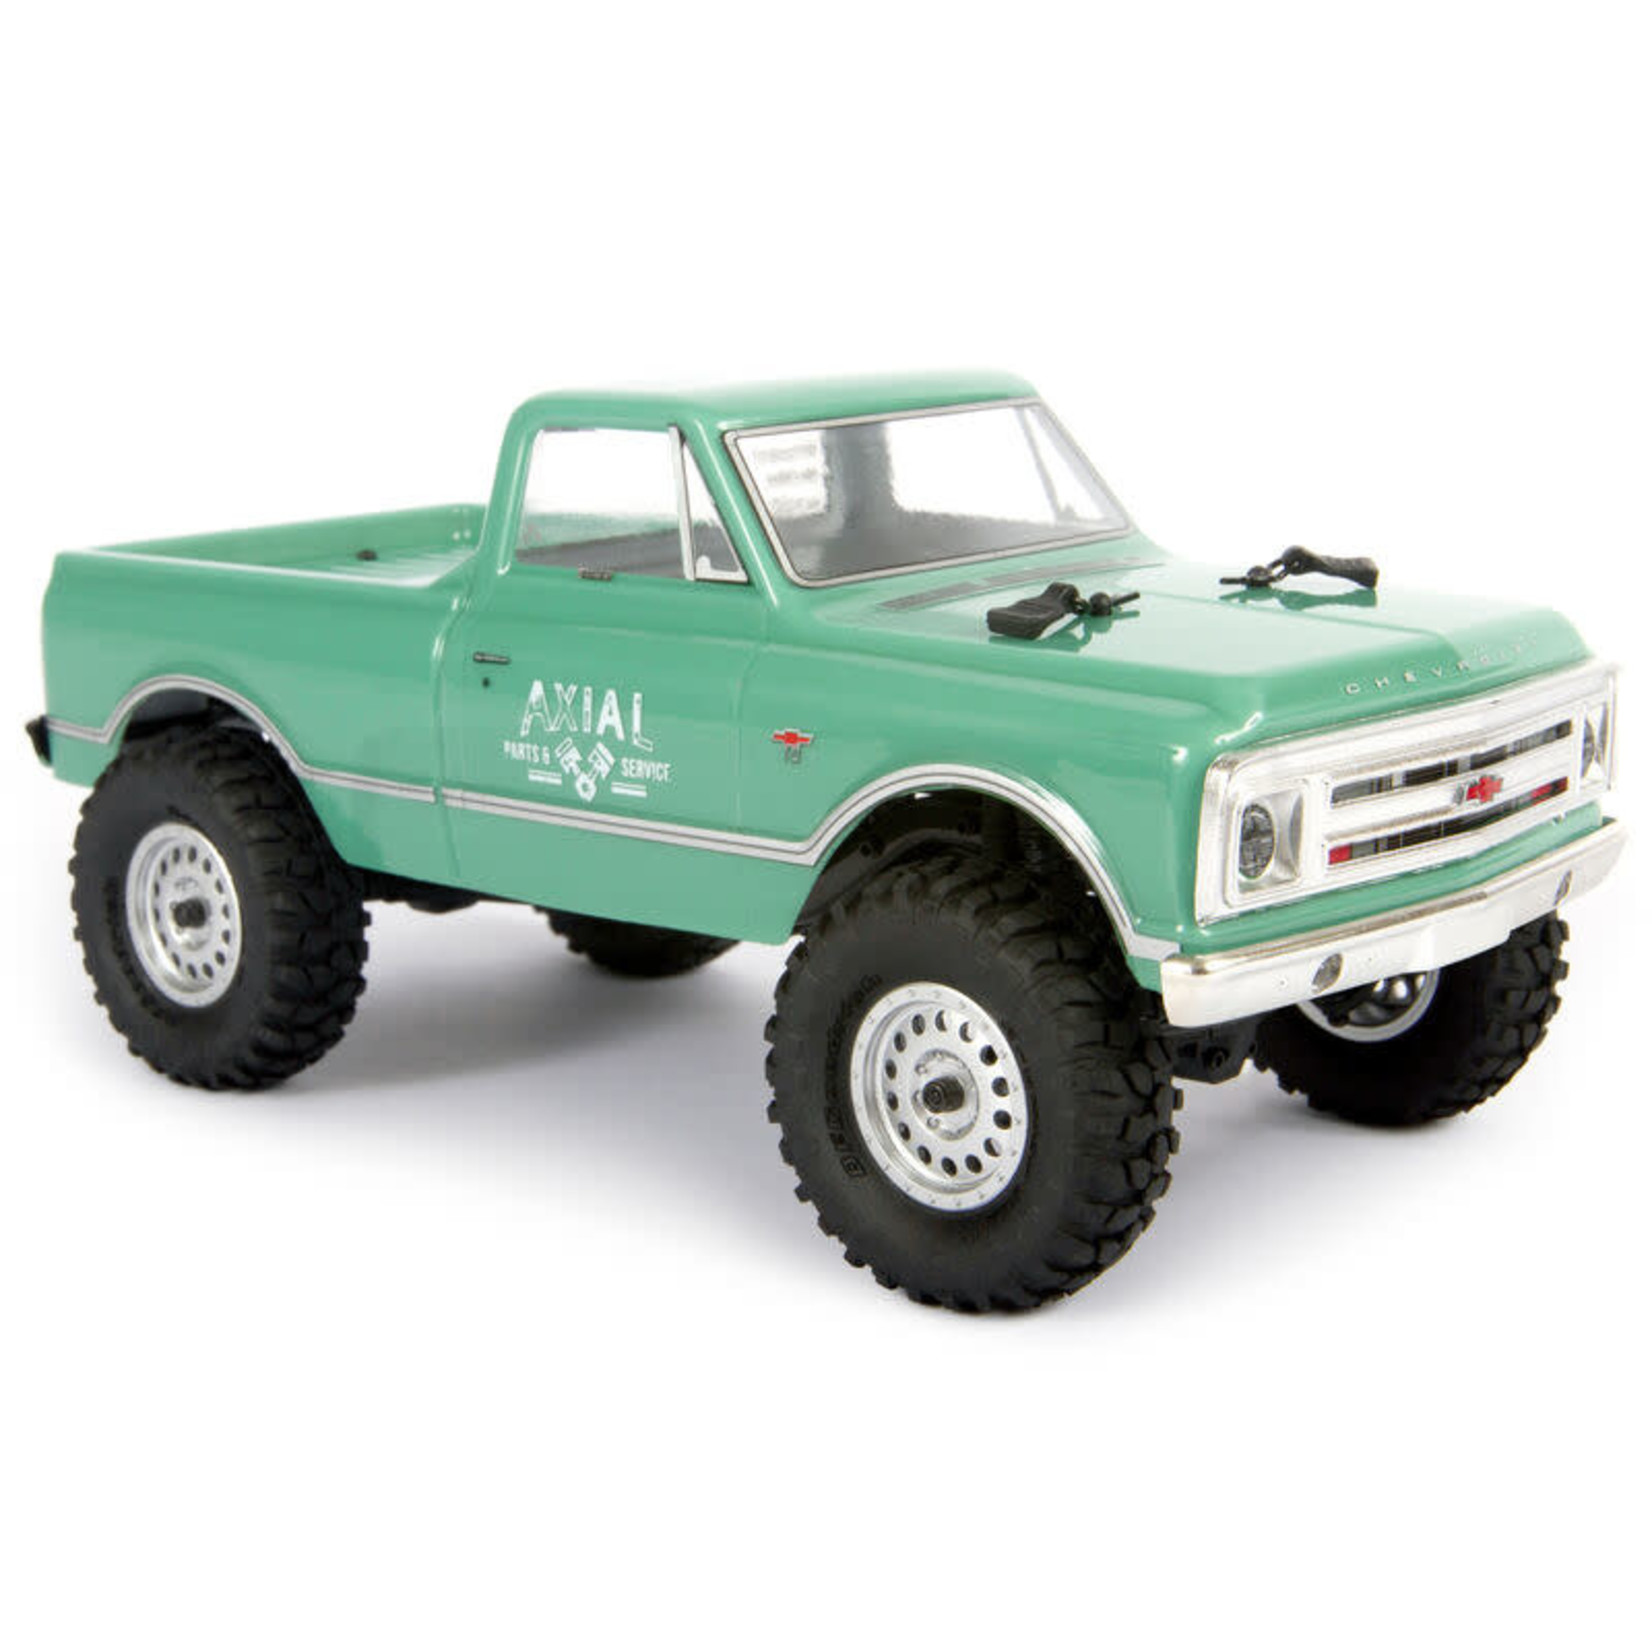 AXIAL 1/24 SCX24 1967 Chevrolet C10 4WD Truck Brushed RTR, Green